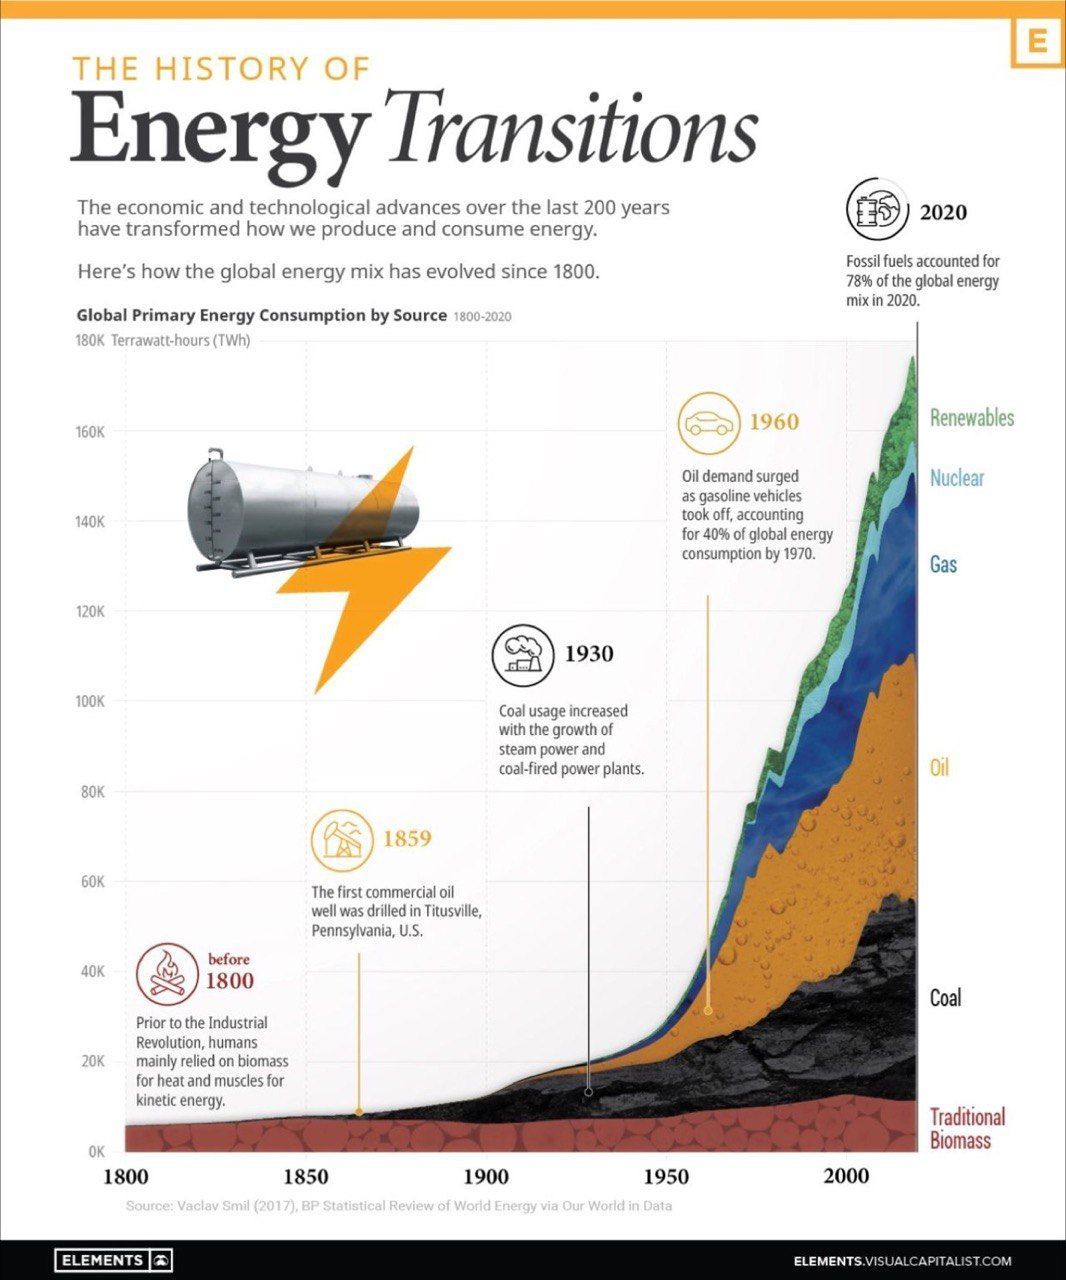 https://www.visualcapitalist.com/visualizing-the-history-of-energy-transitions/